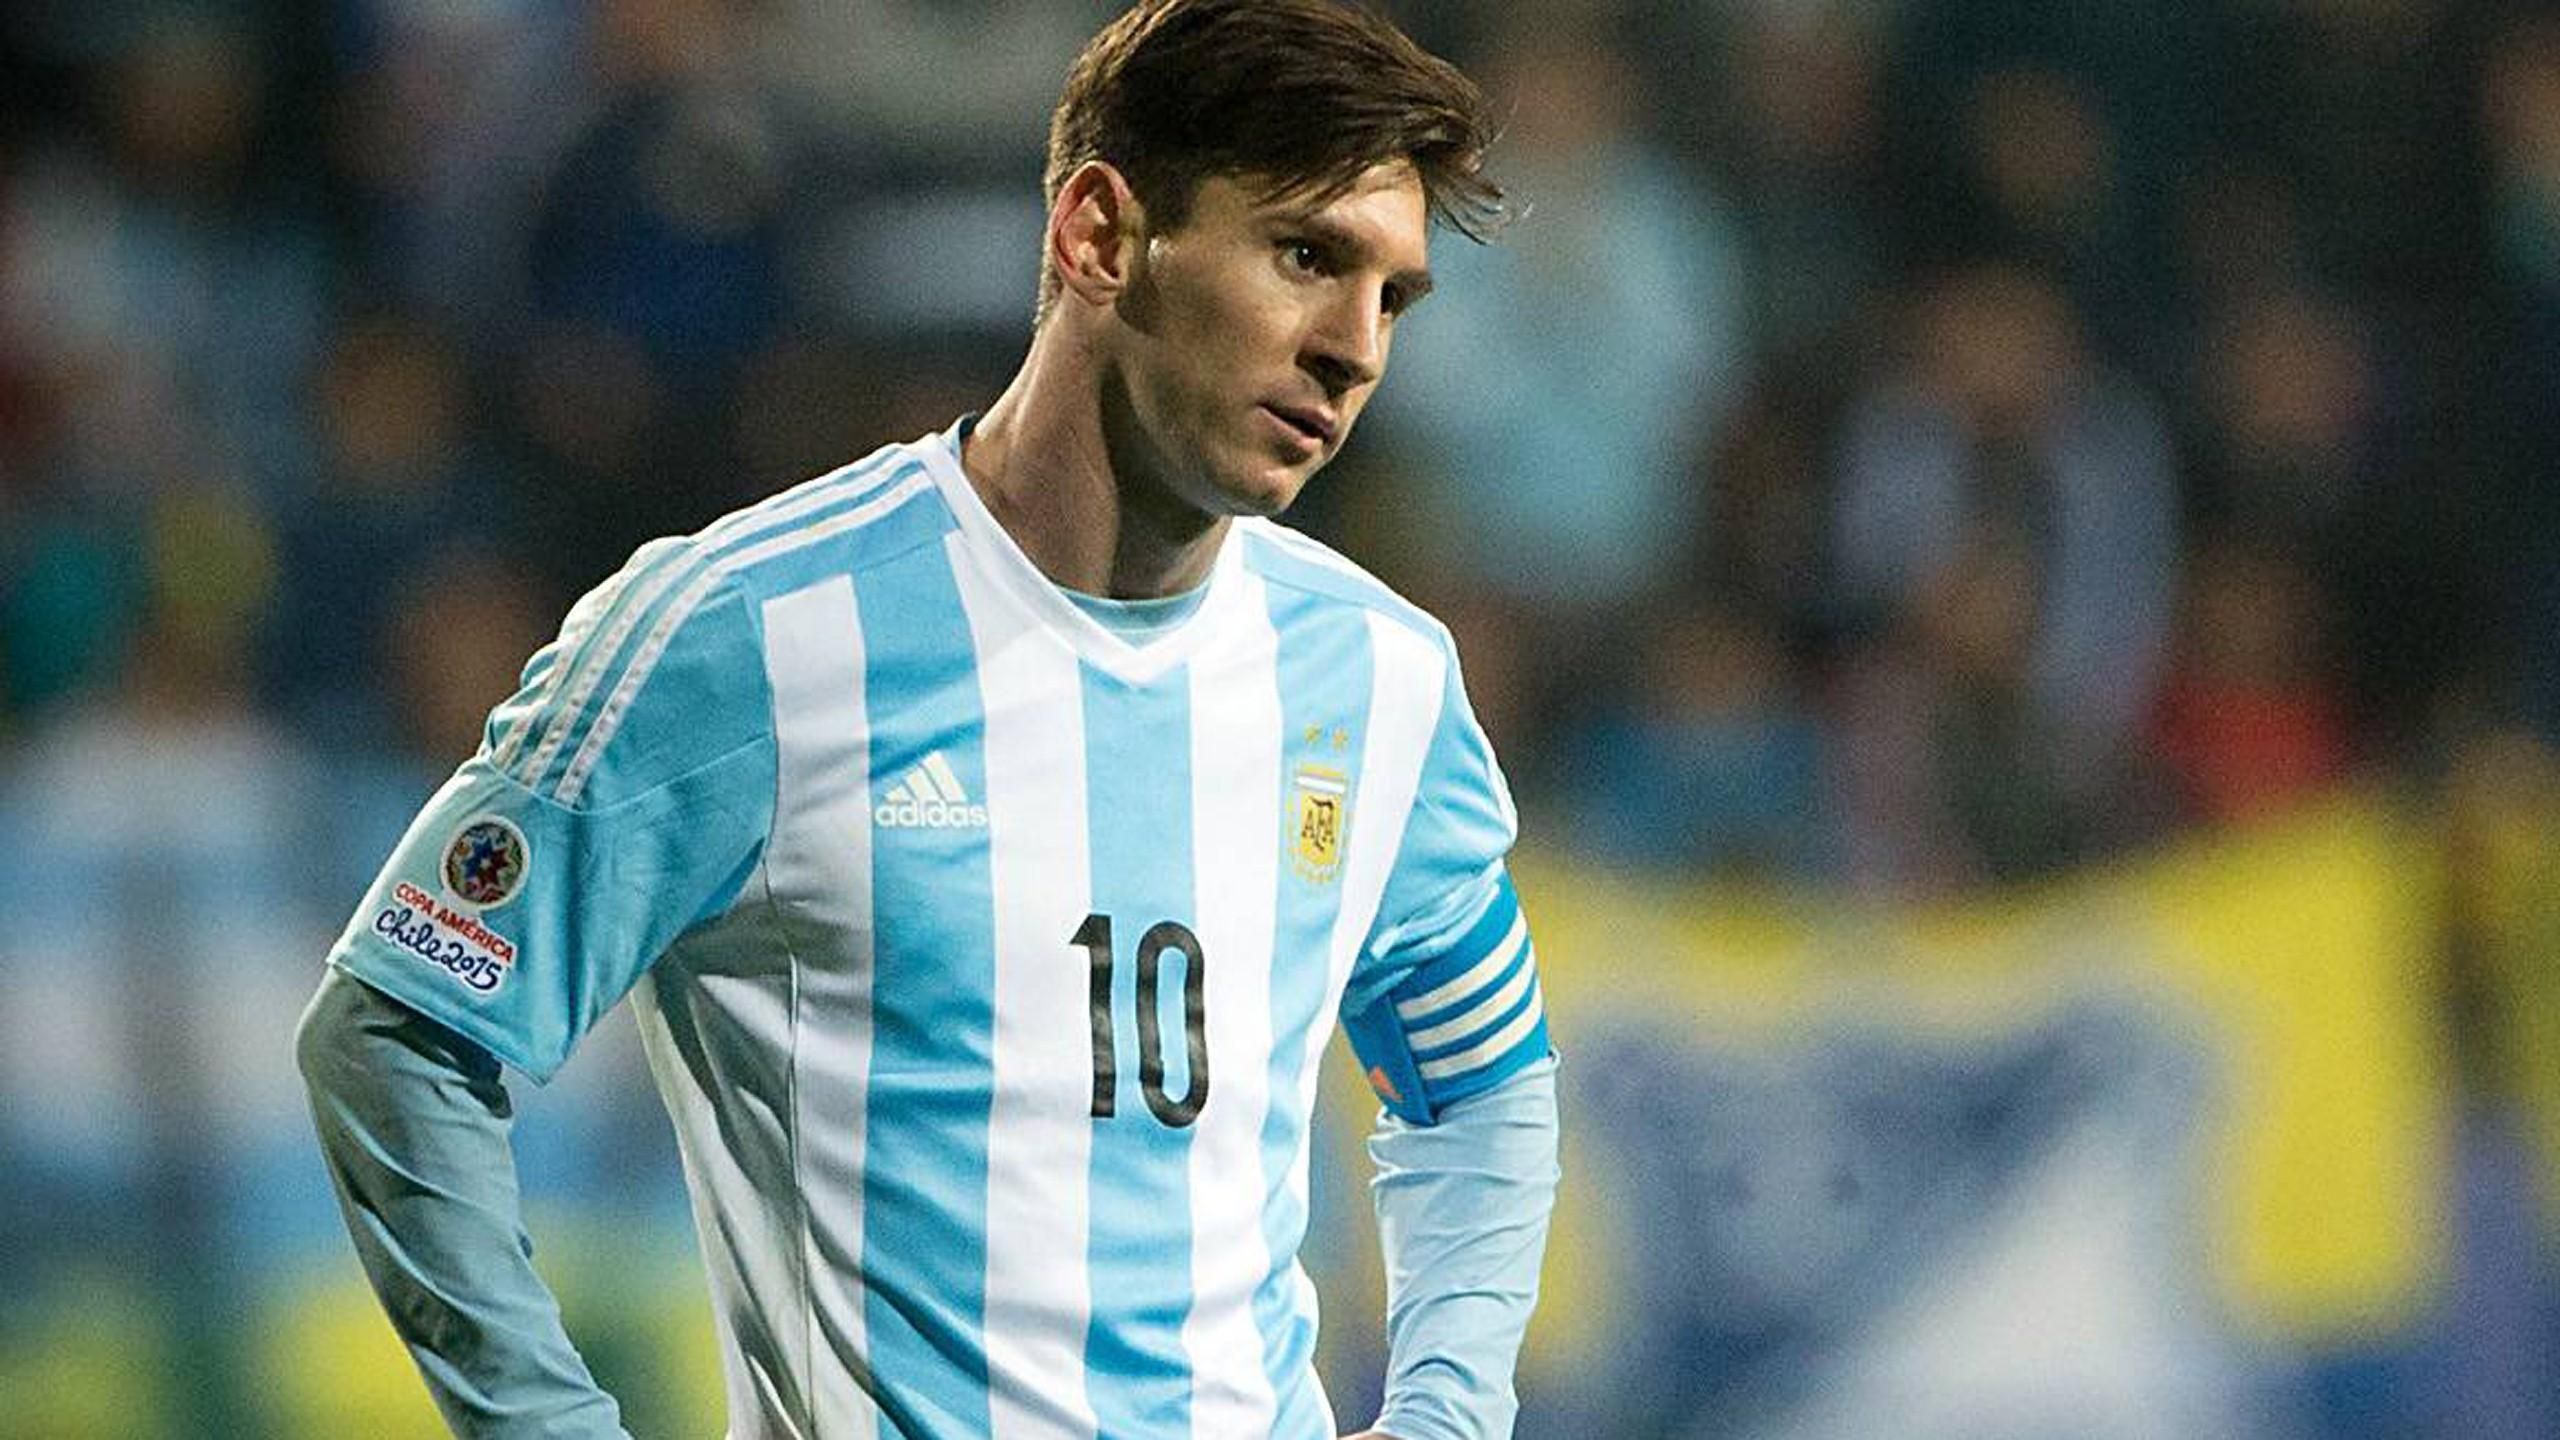 Lionel Messi posts heartbreaking message to fans after Copa America humbling